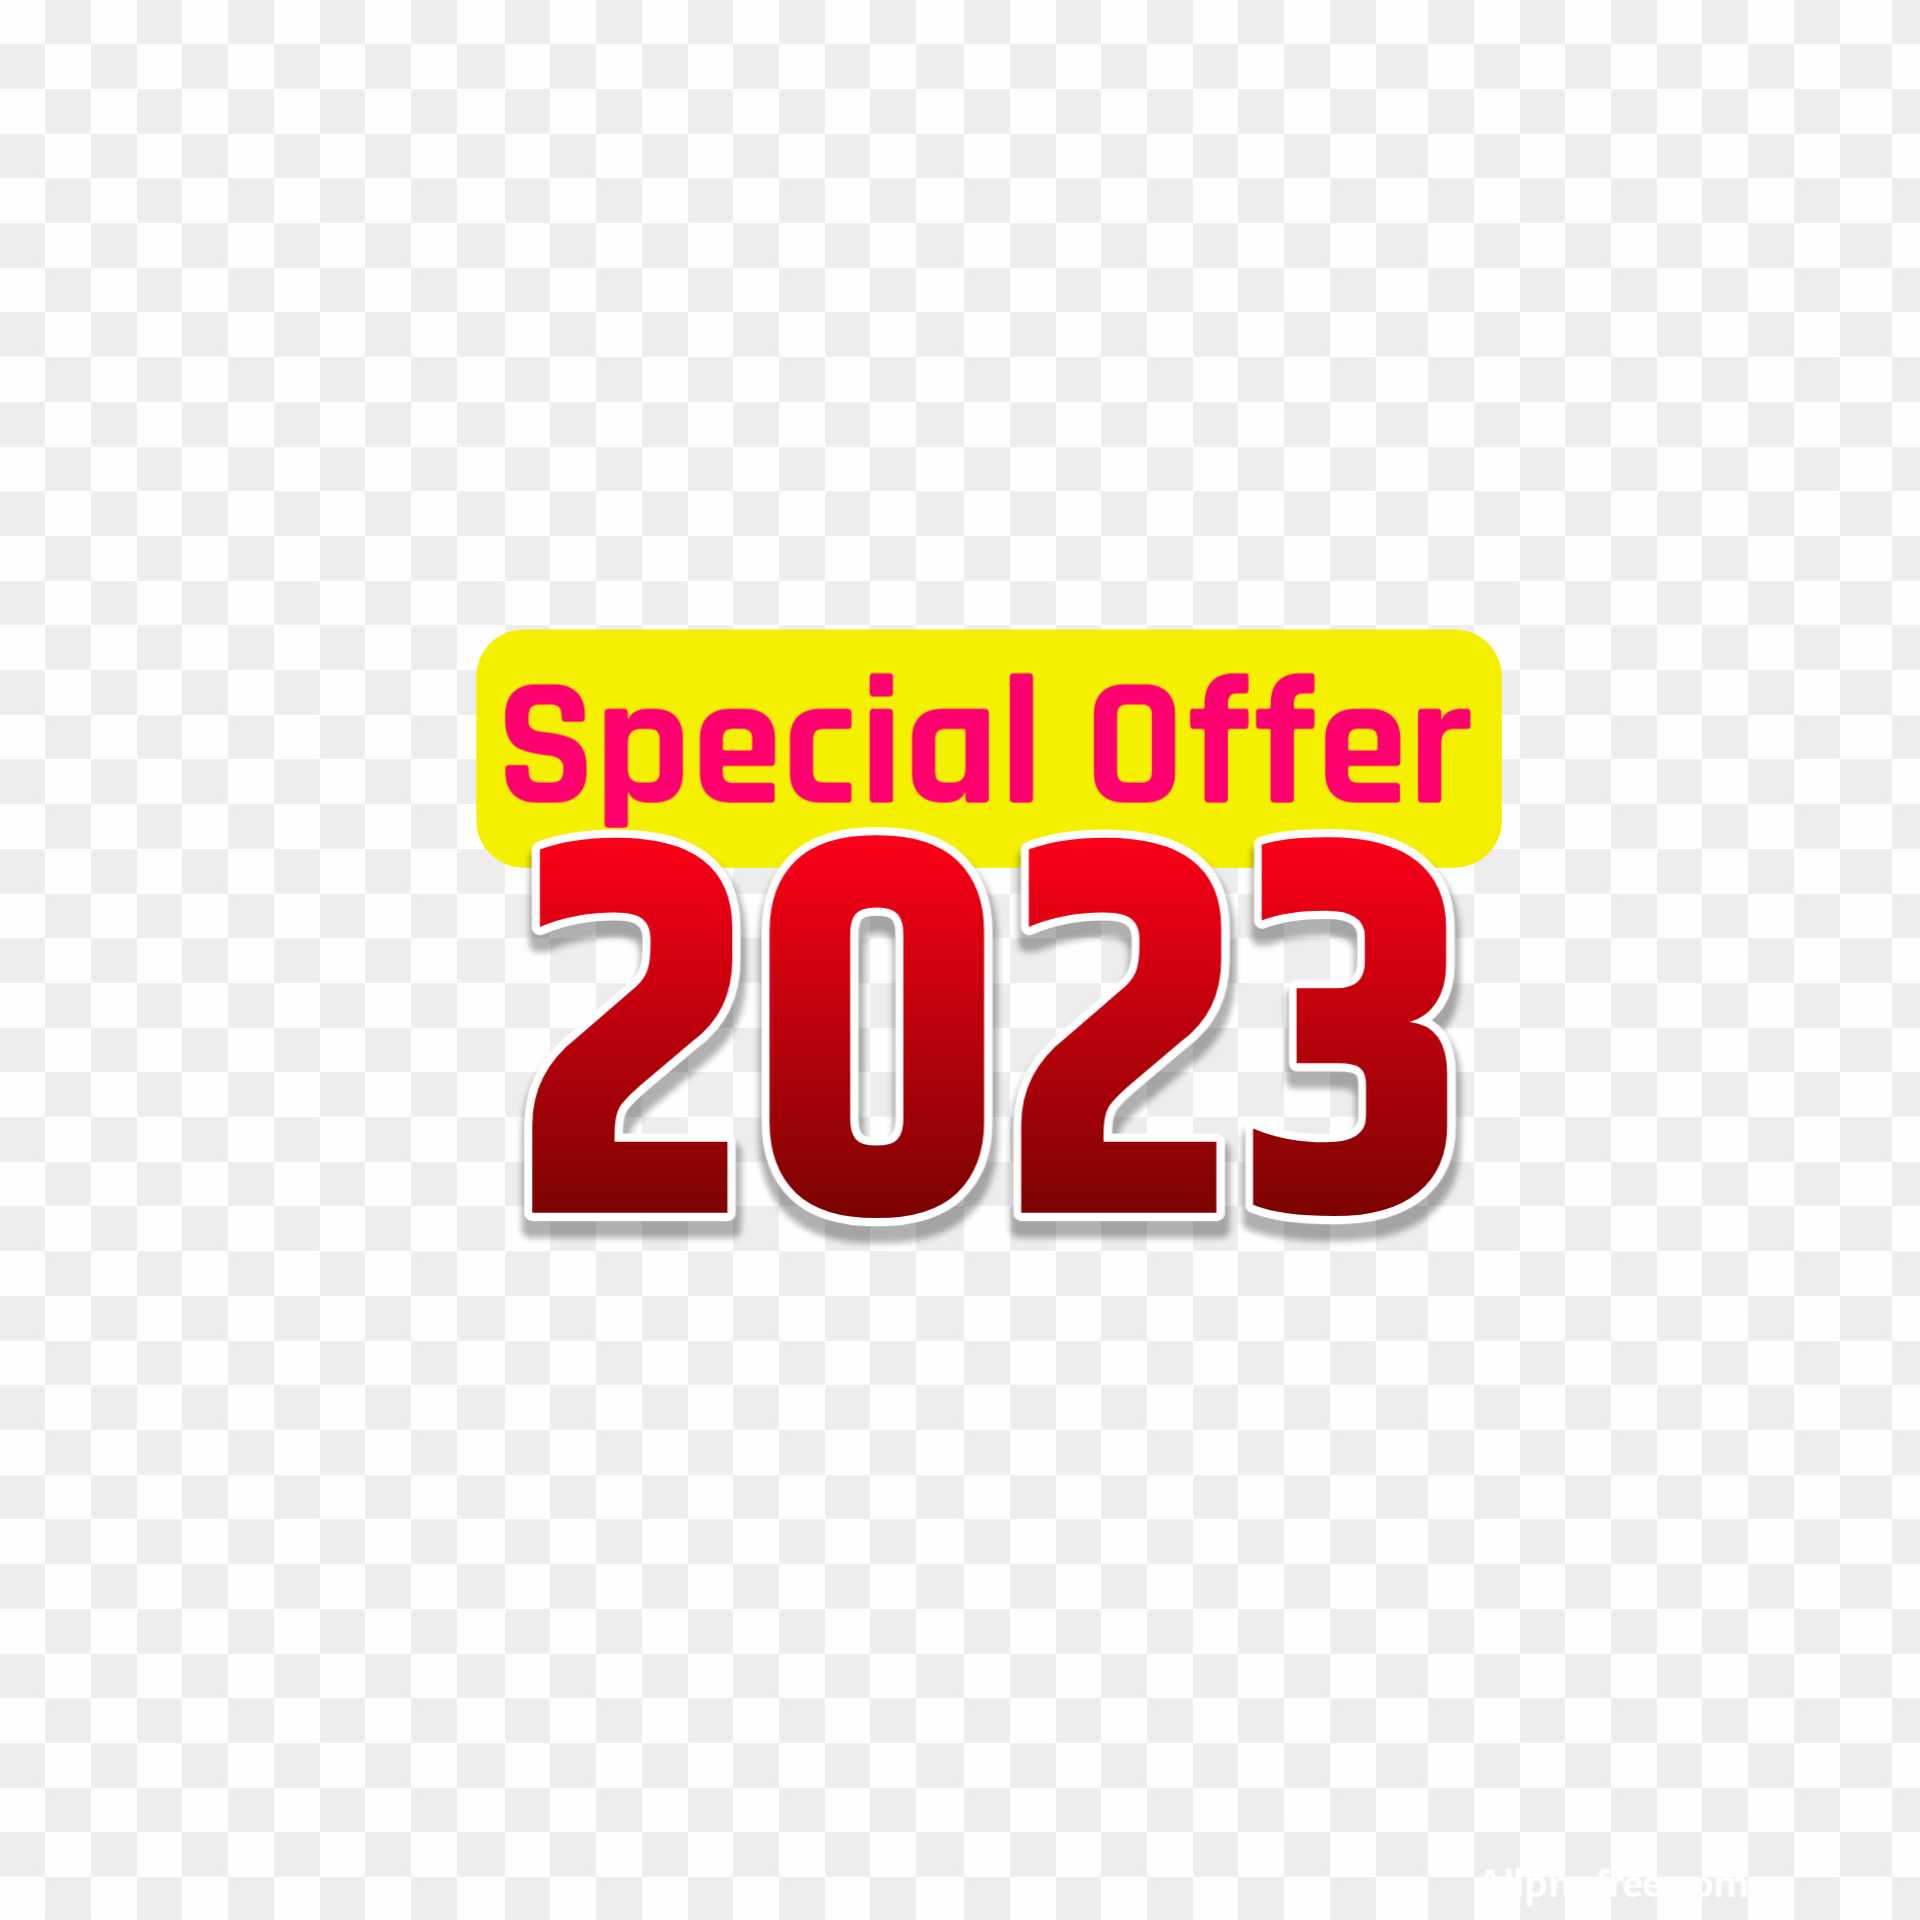 Special Offer Red Label Vector Illustration 2795001 Vector Art at Vecteezy